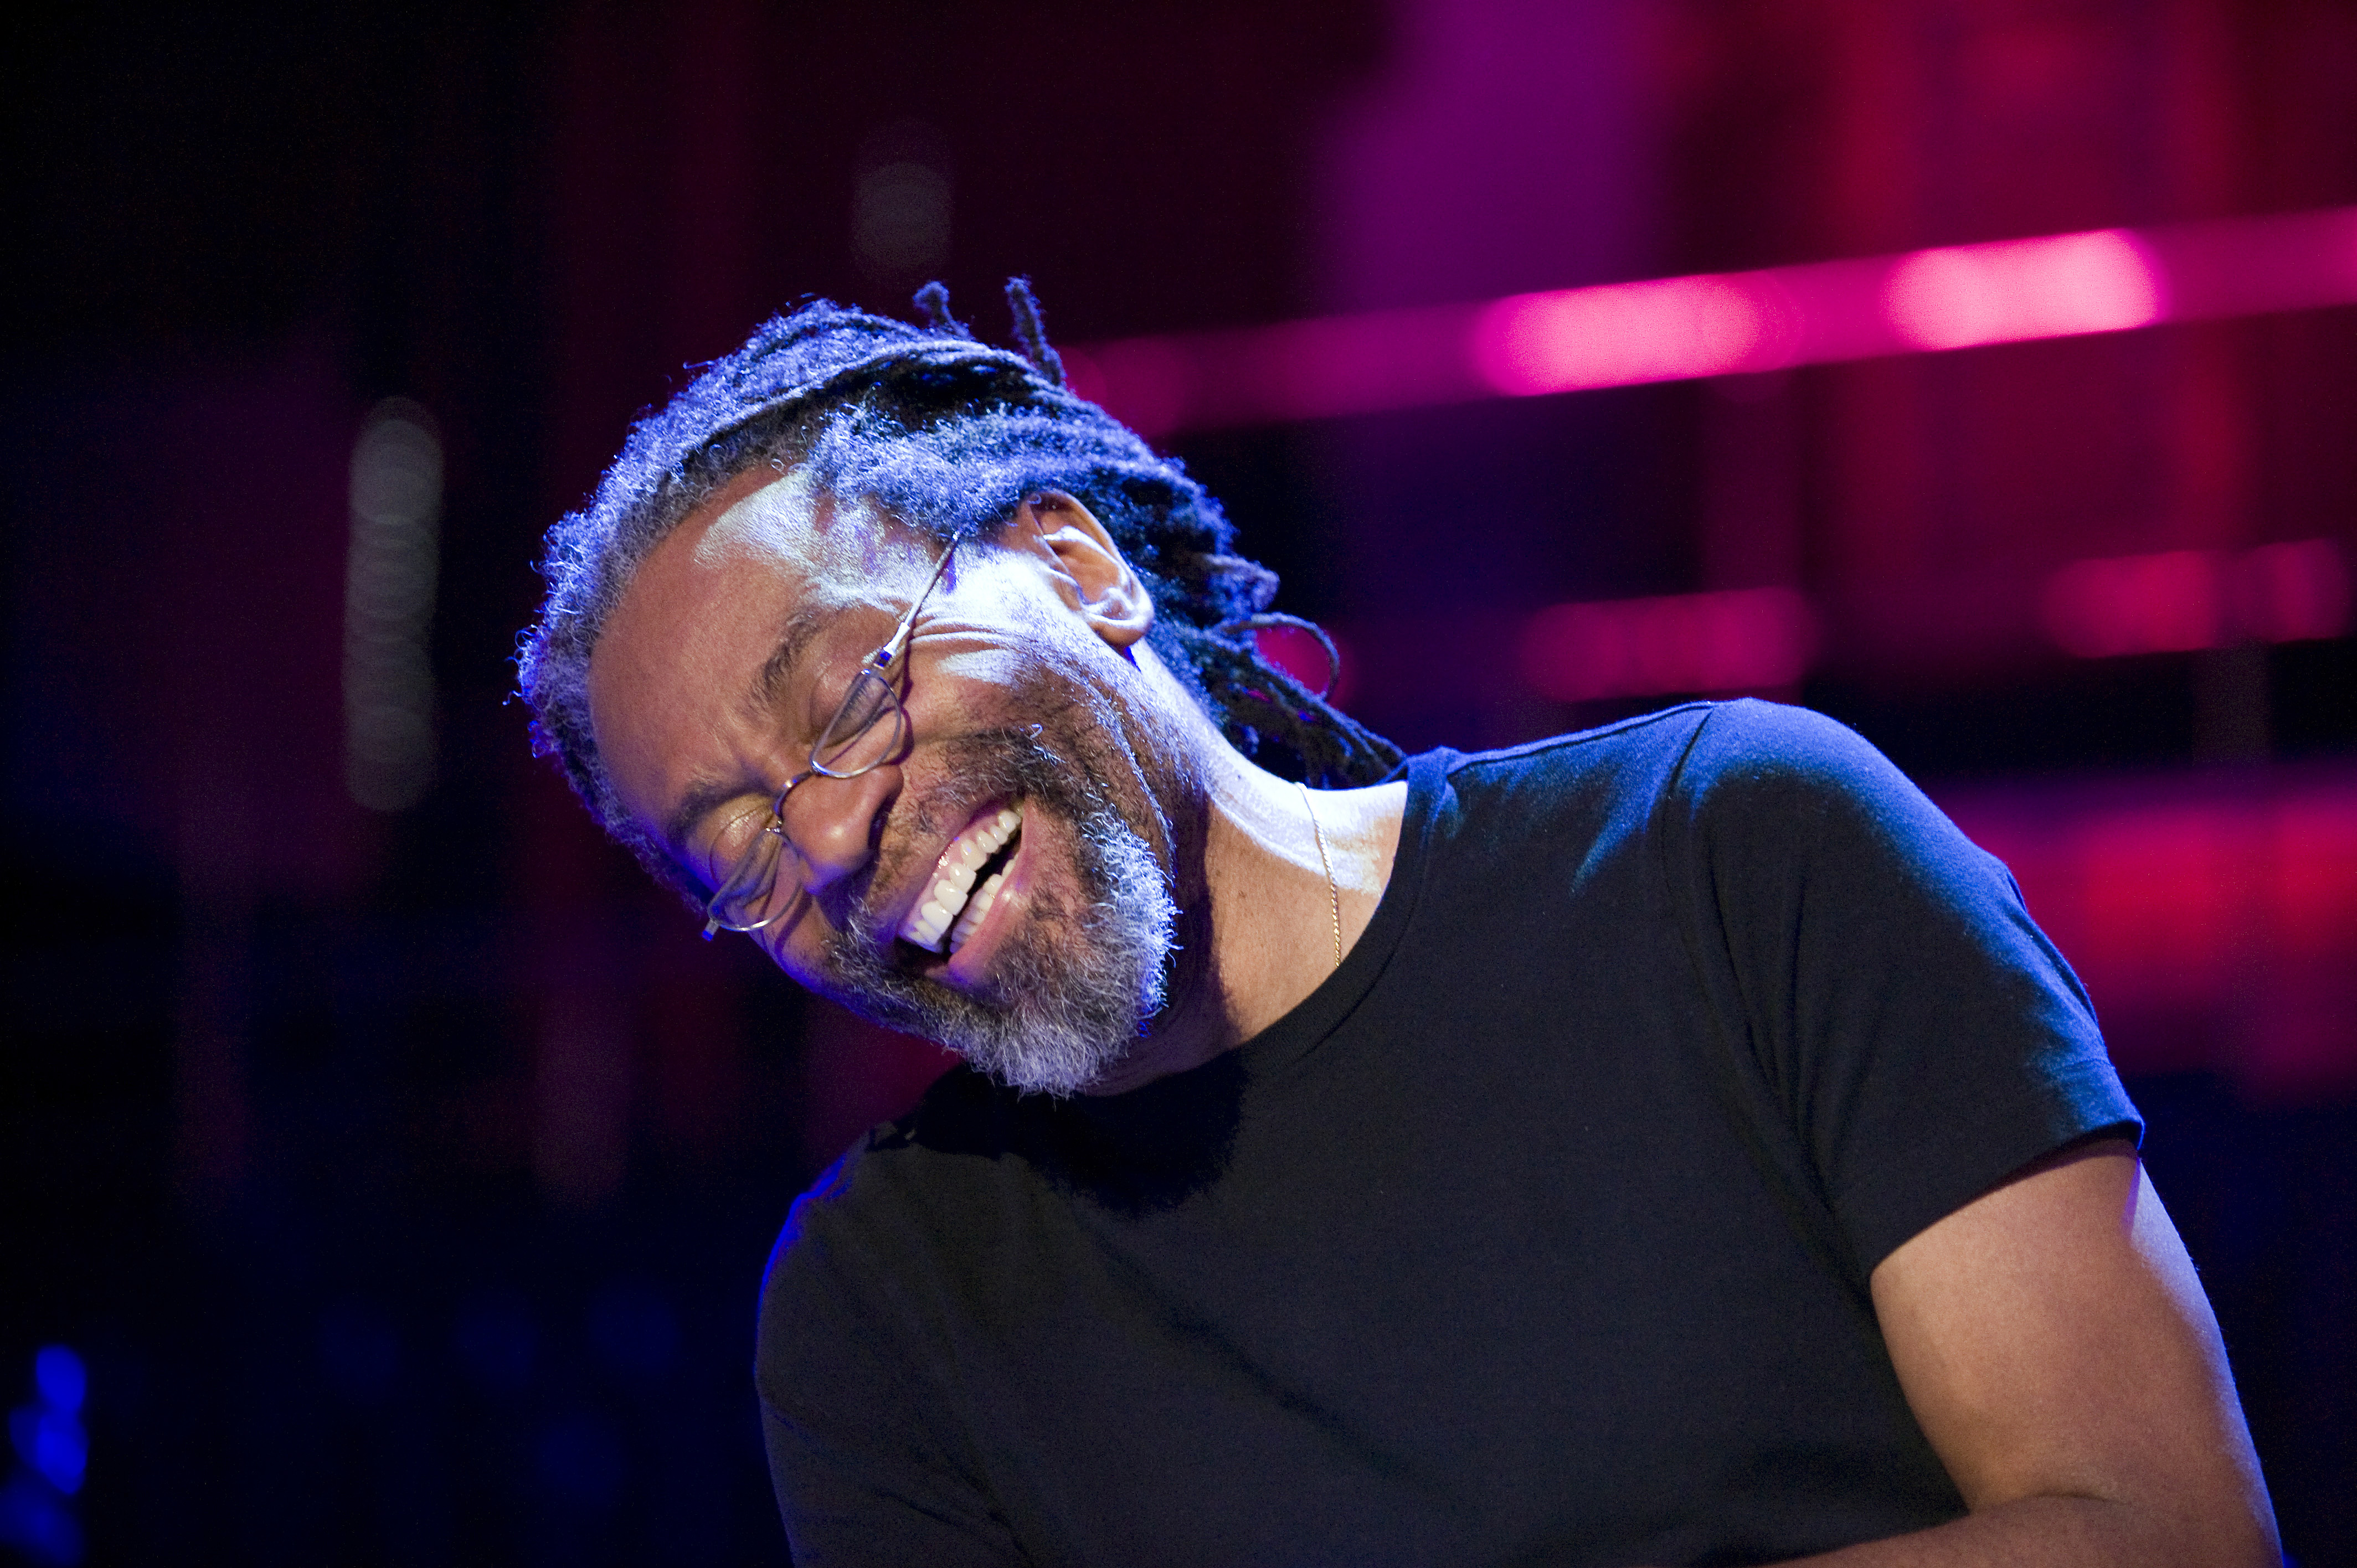 Bobby McFerrin was among the top festival acts this year. Photo: Petra Hajska